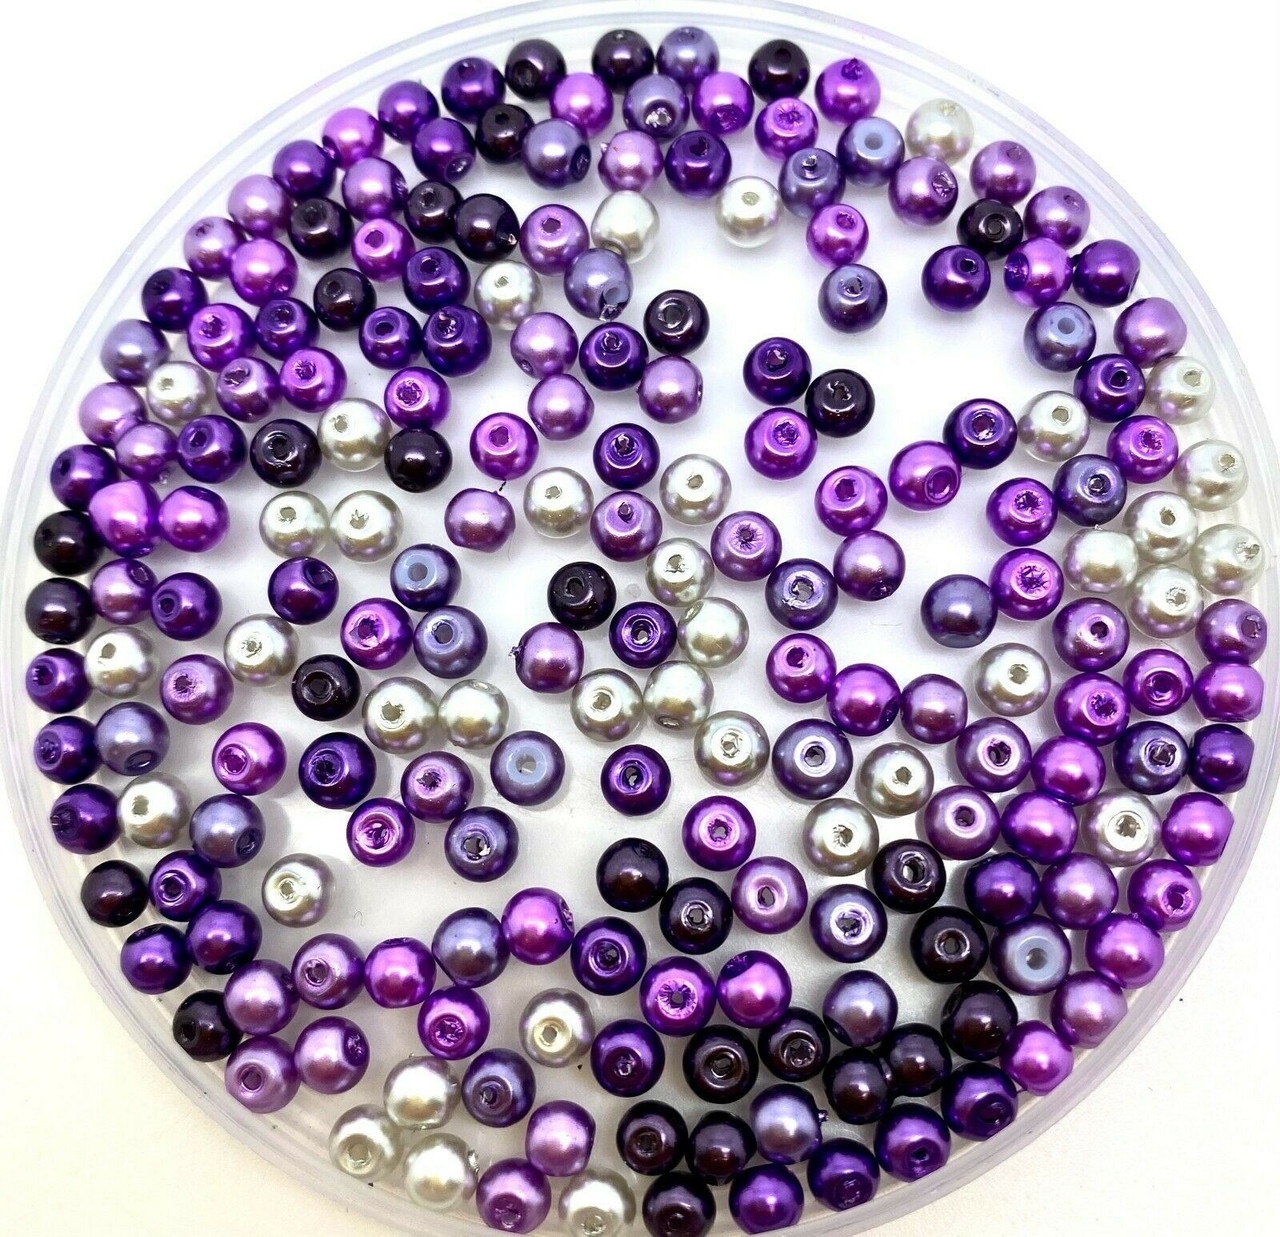 Shades of Purple 3mm Glass Pearls